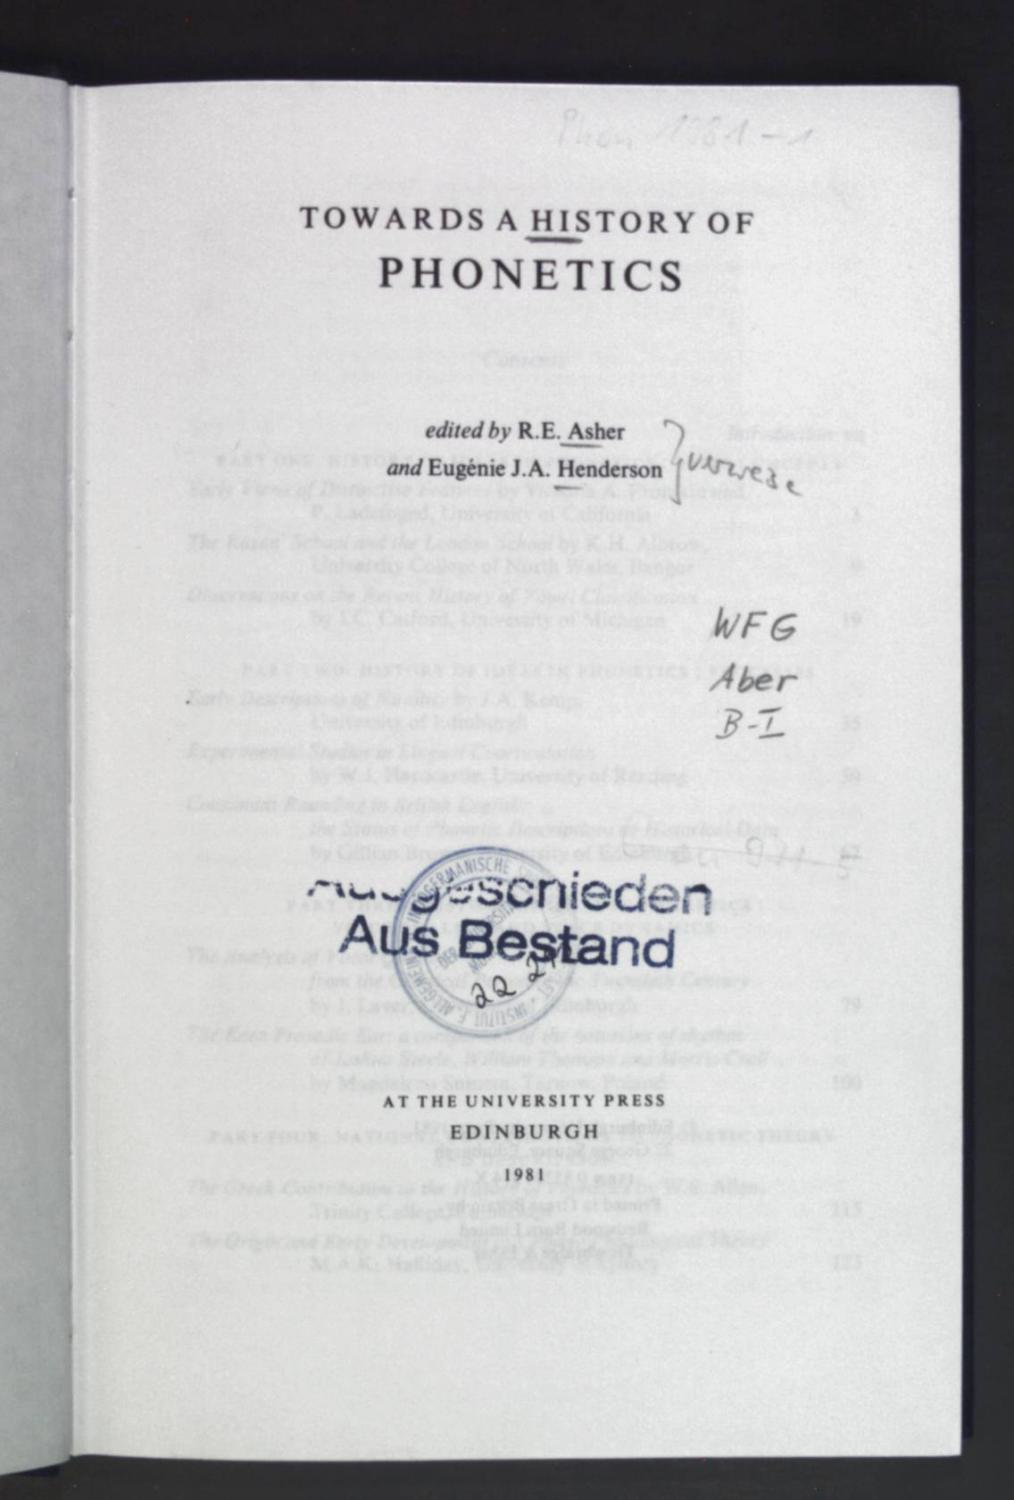 Towards a History of Phonetics. - Henderson, Eugenie J. A. and R.E. Asher